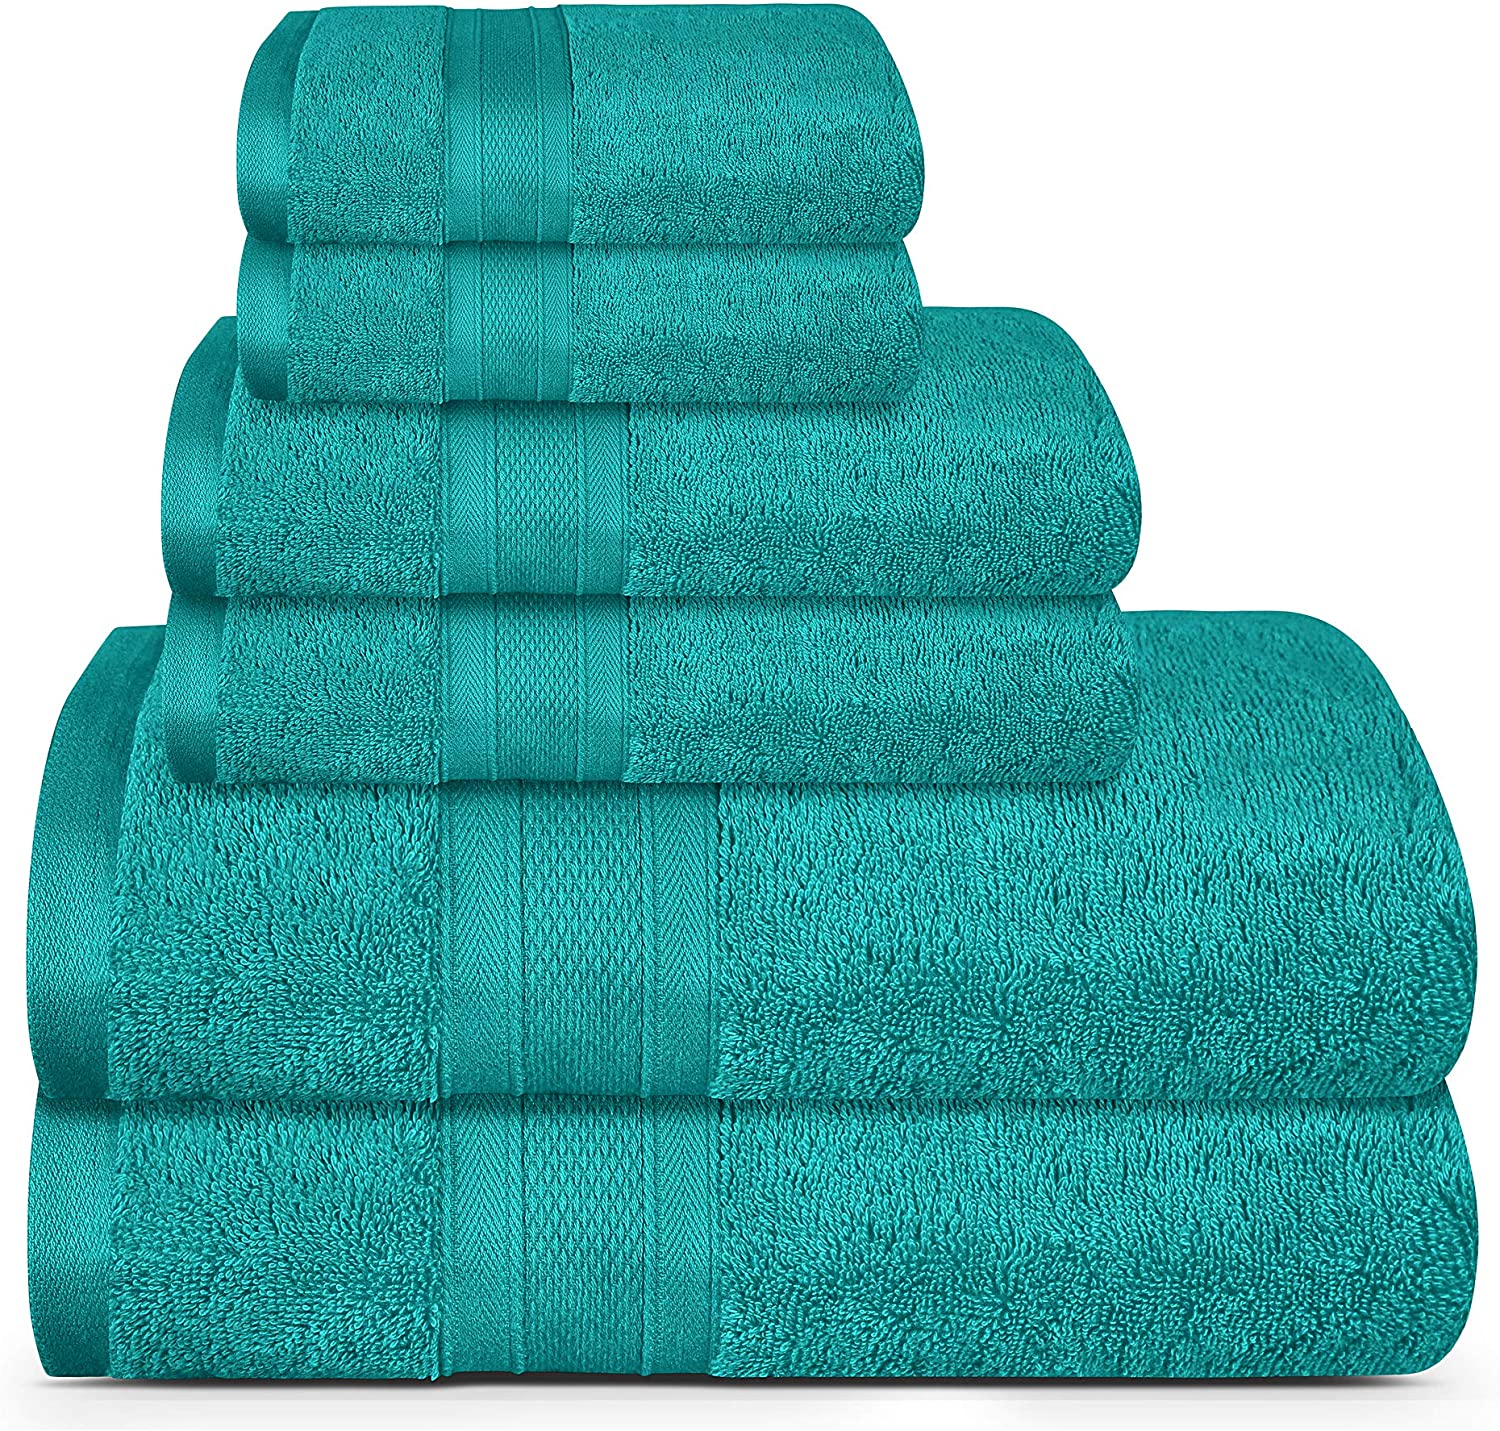 The Trident Cotton Bath Towel Set Is on Sale at